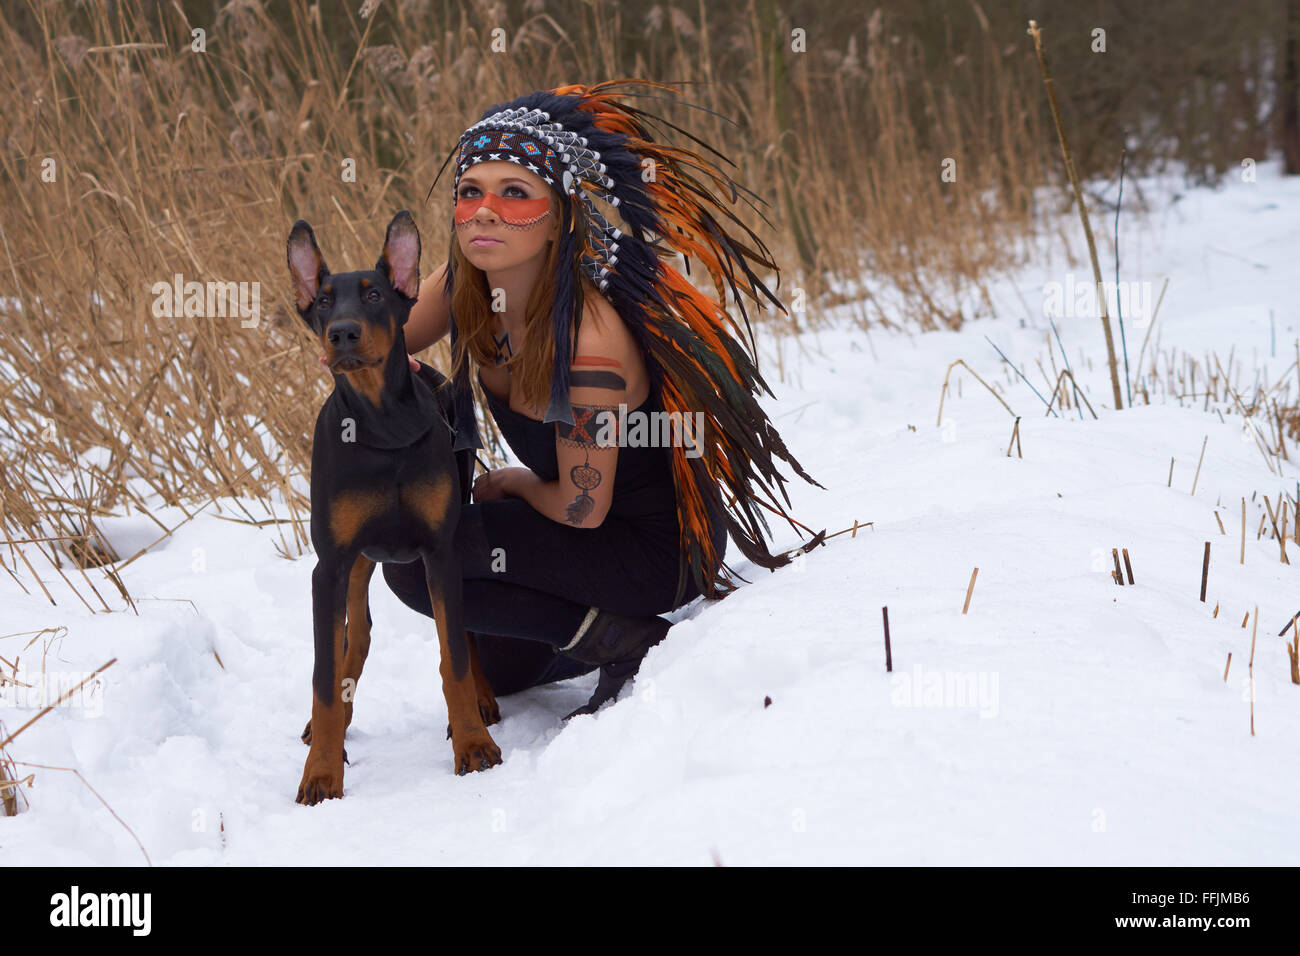 Girl in native american headdress with Doderman Pinscher Stock Photo